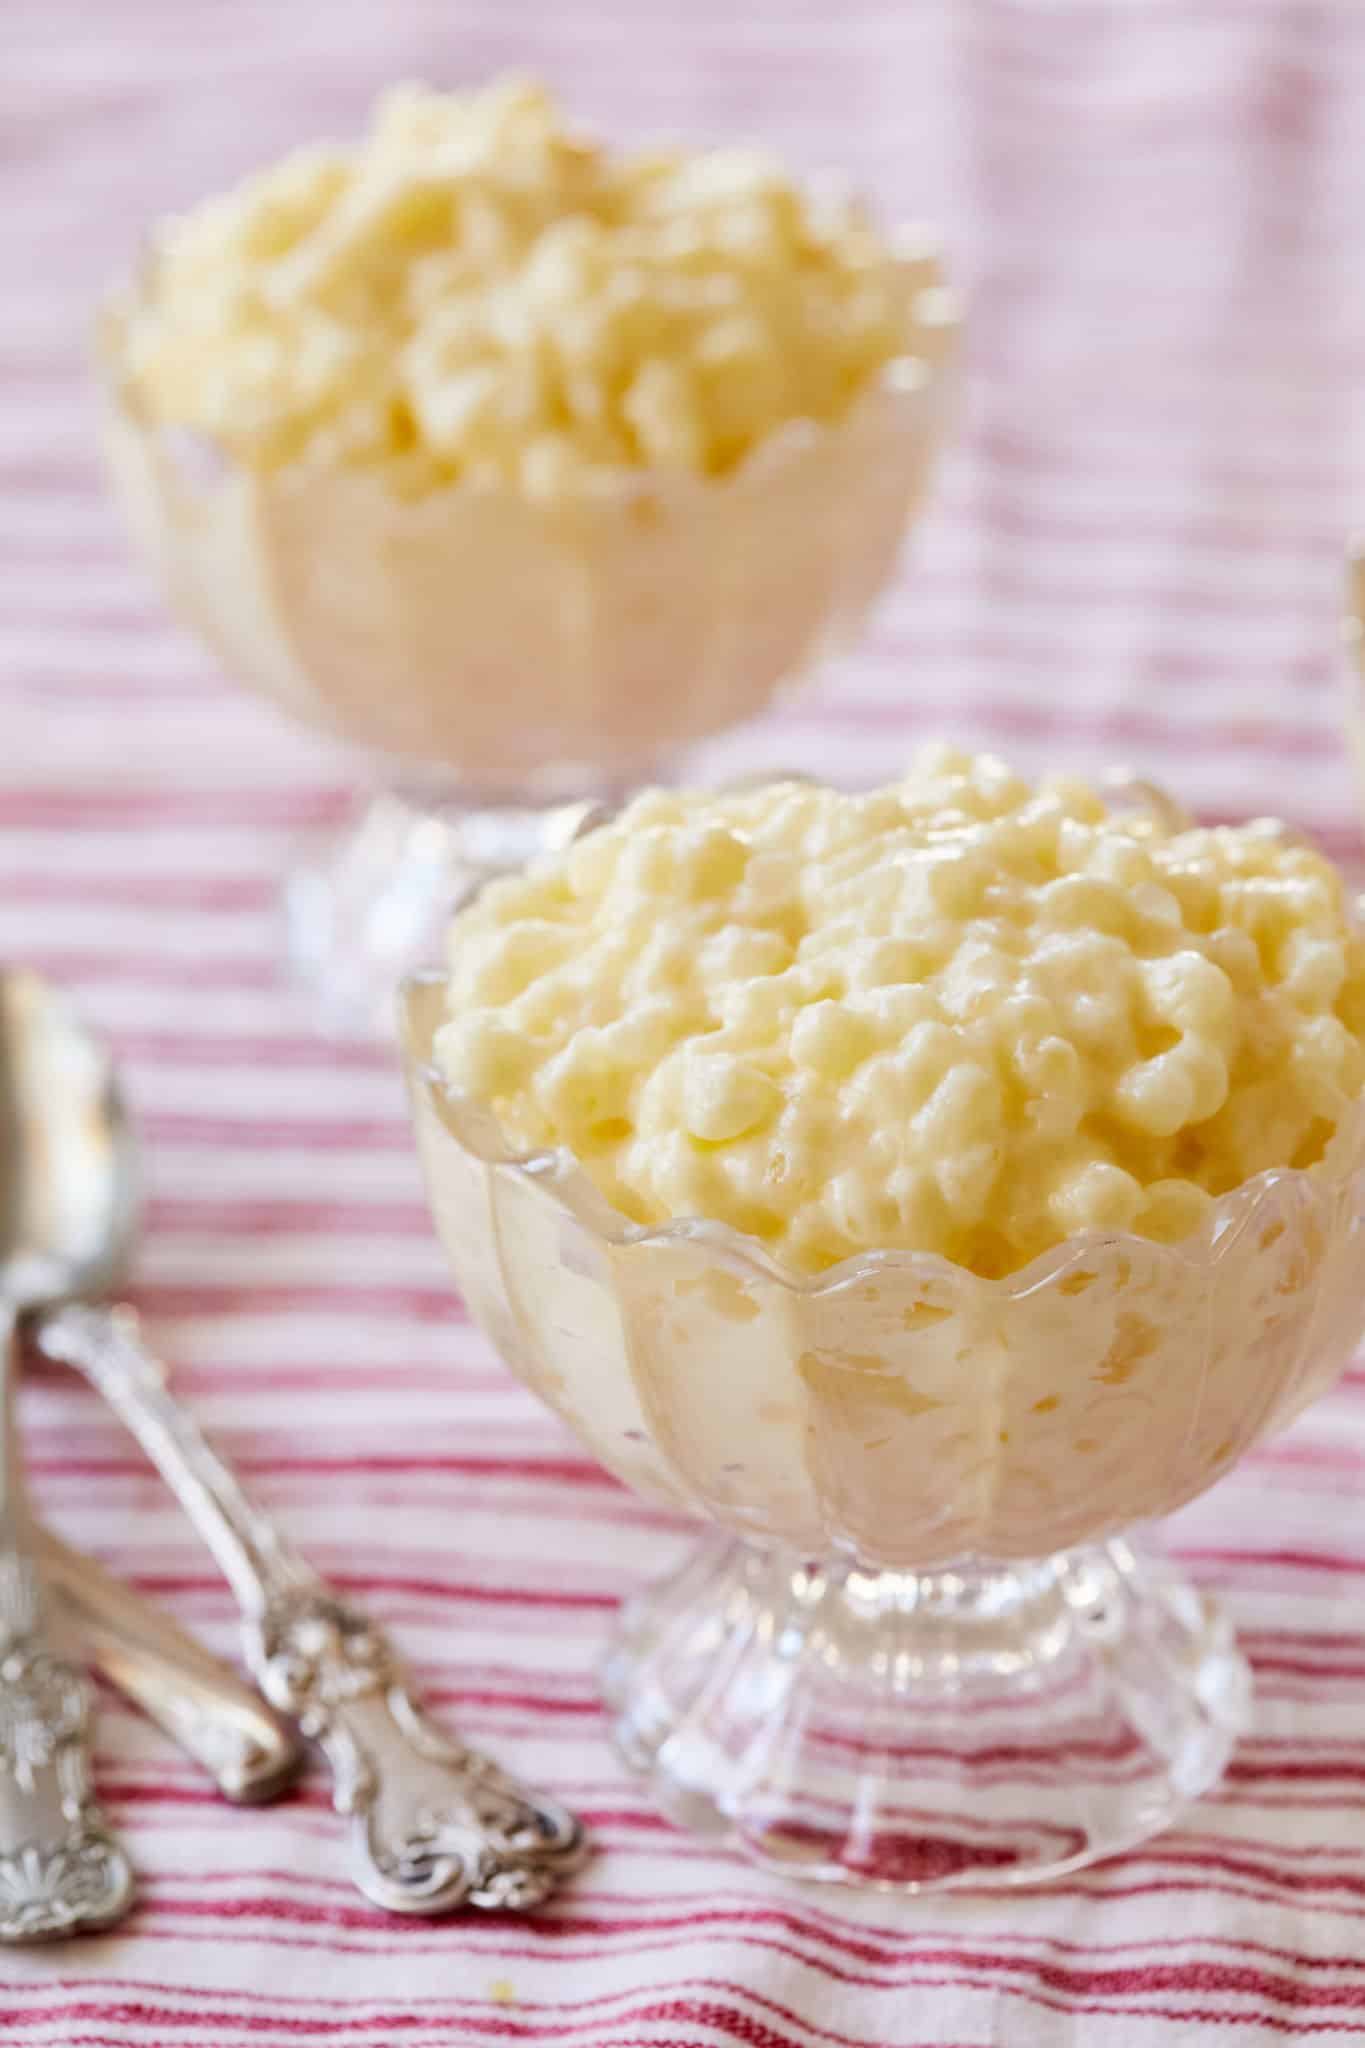 A close up of tapioca pudding served in glass dishes.